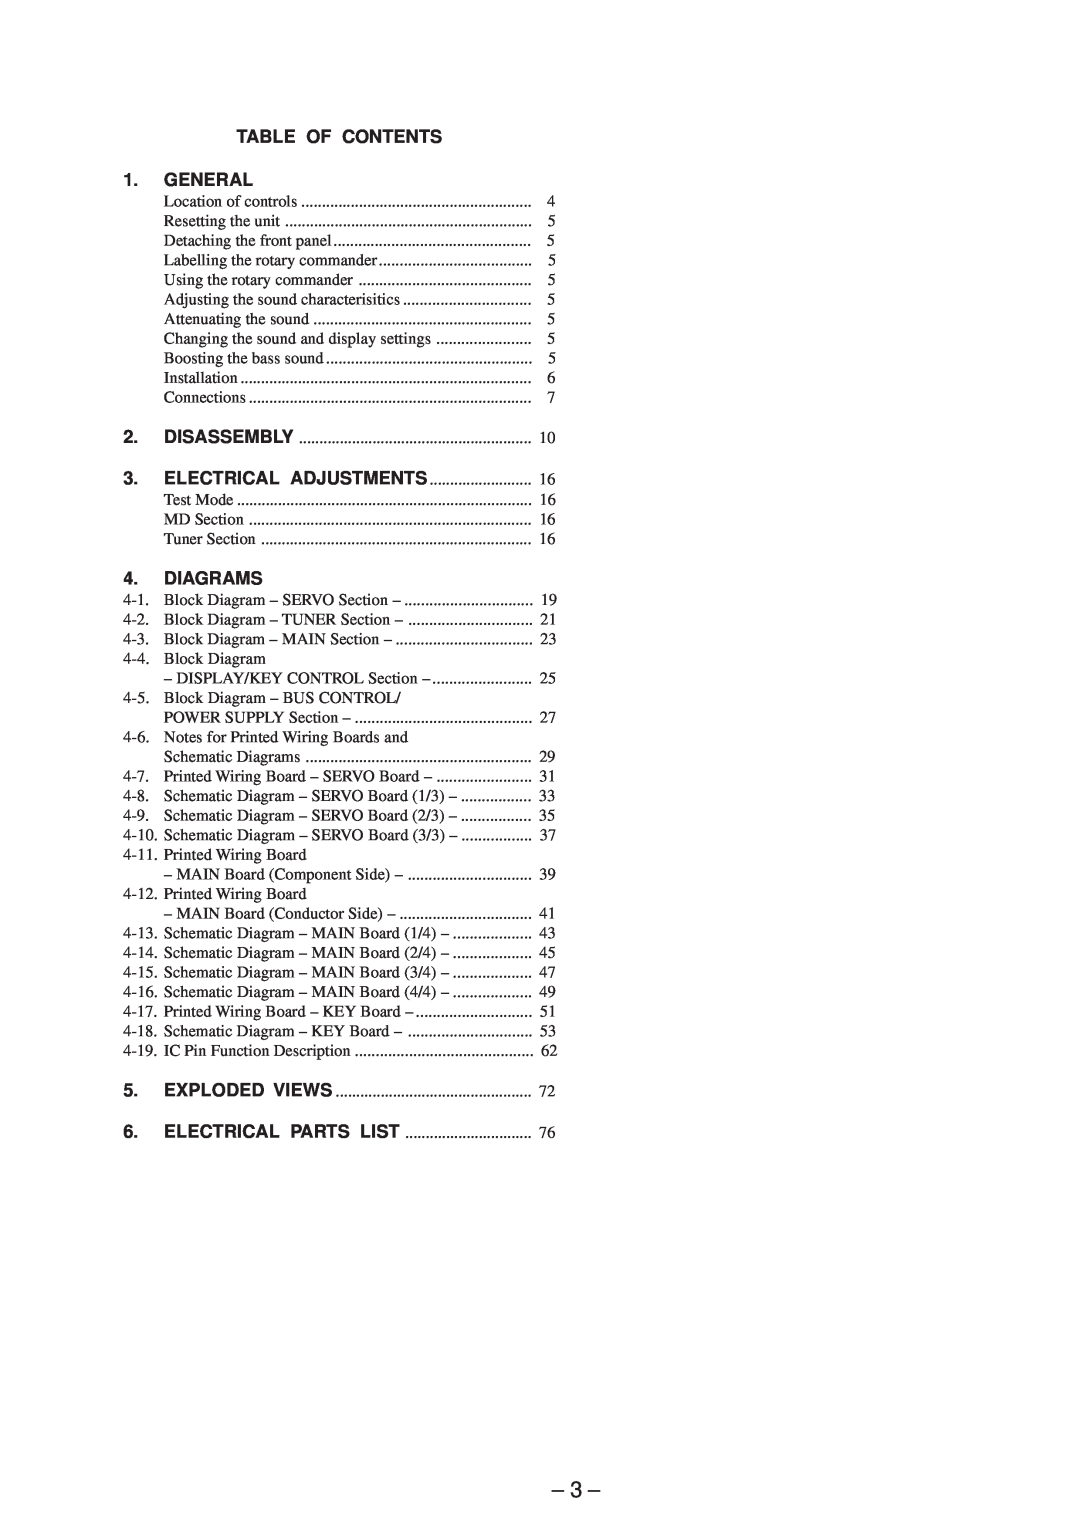 Sony MDX-C5970R service manual 3, TABLE OF CONTENTS 1.GENERAL, Diagrams 